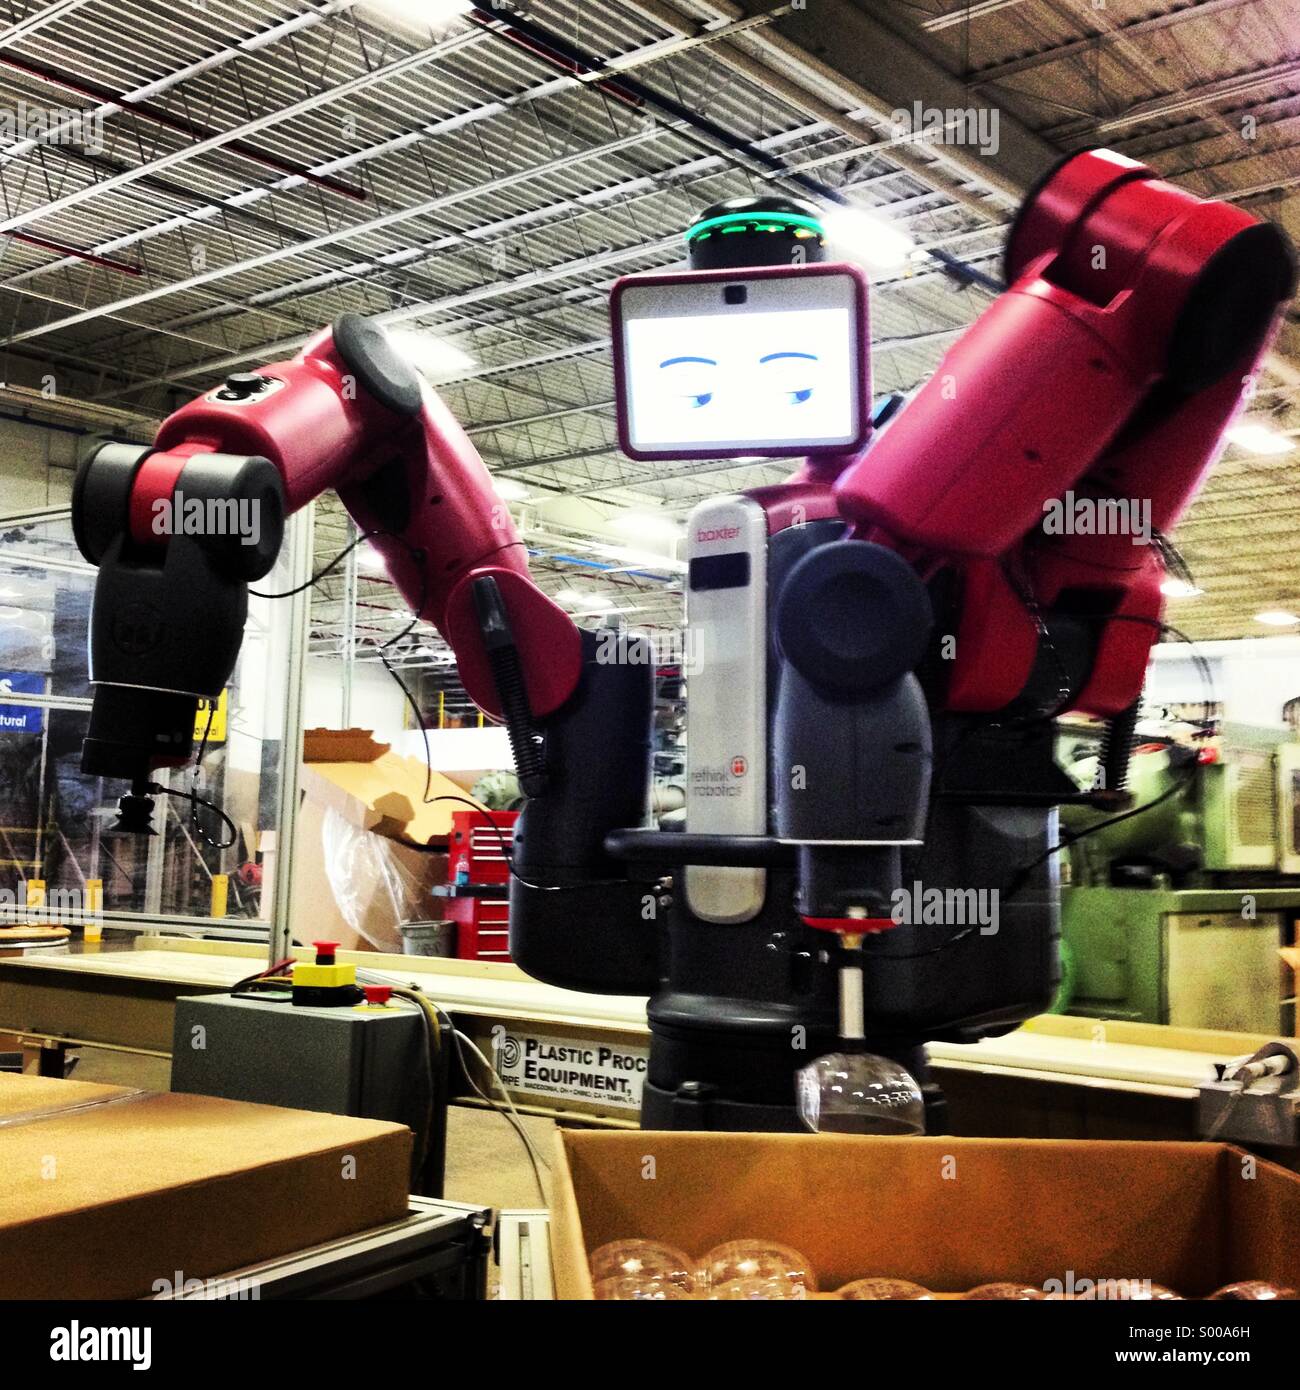 A Baxter robot made by Rethink Robotics in a factory setting. Stock Photo